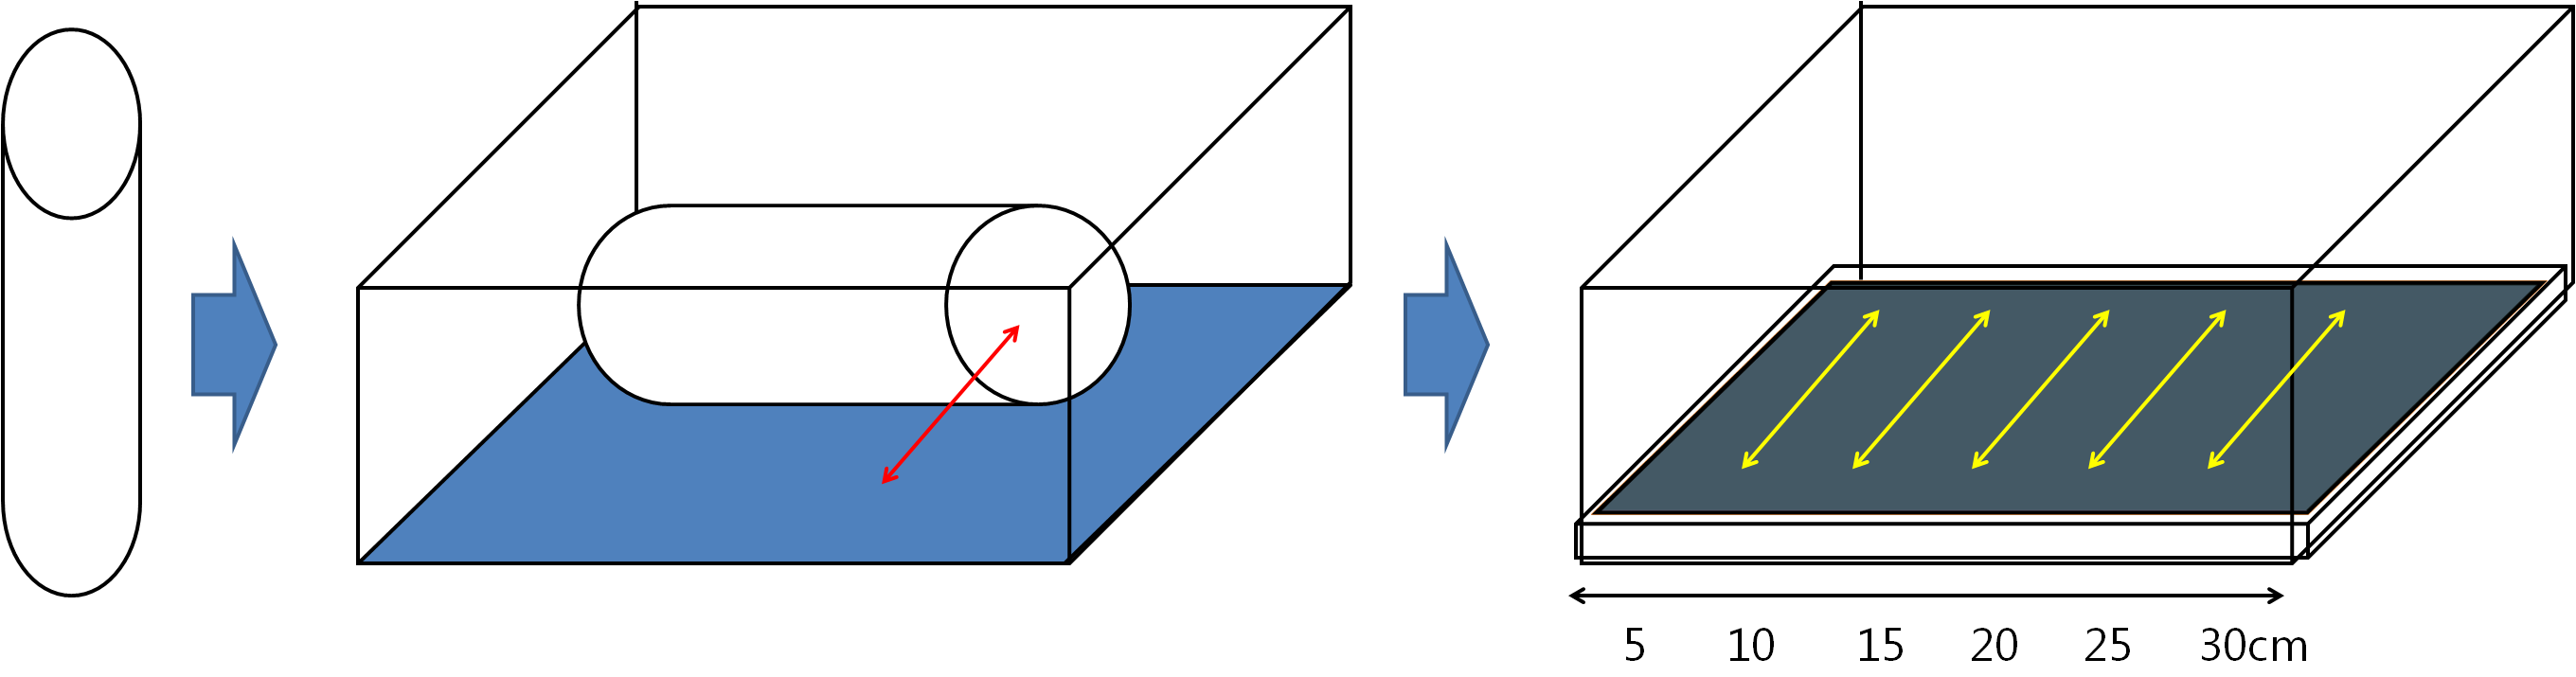 Diagrams of new monitoring method for evaluating vertical distribution of soil seedbank. (a) Sampled soil pillars (b) Tilt in rectangular containers (c) Spreads soil pillars in the horizontal direction